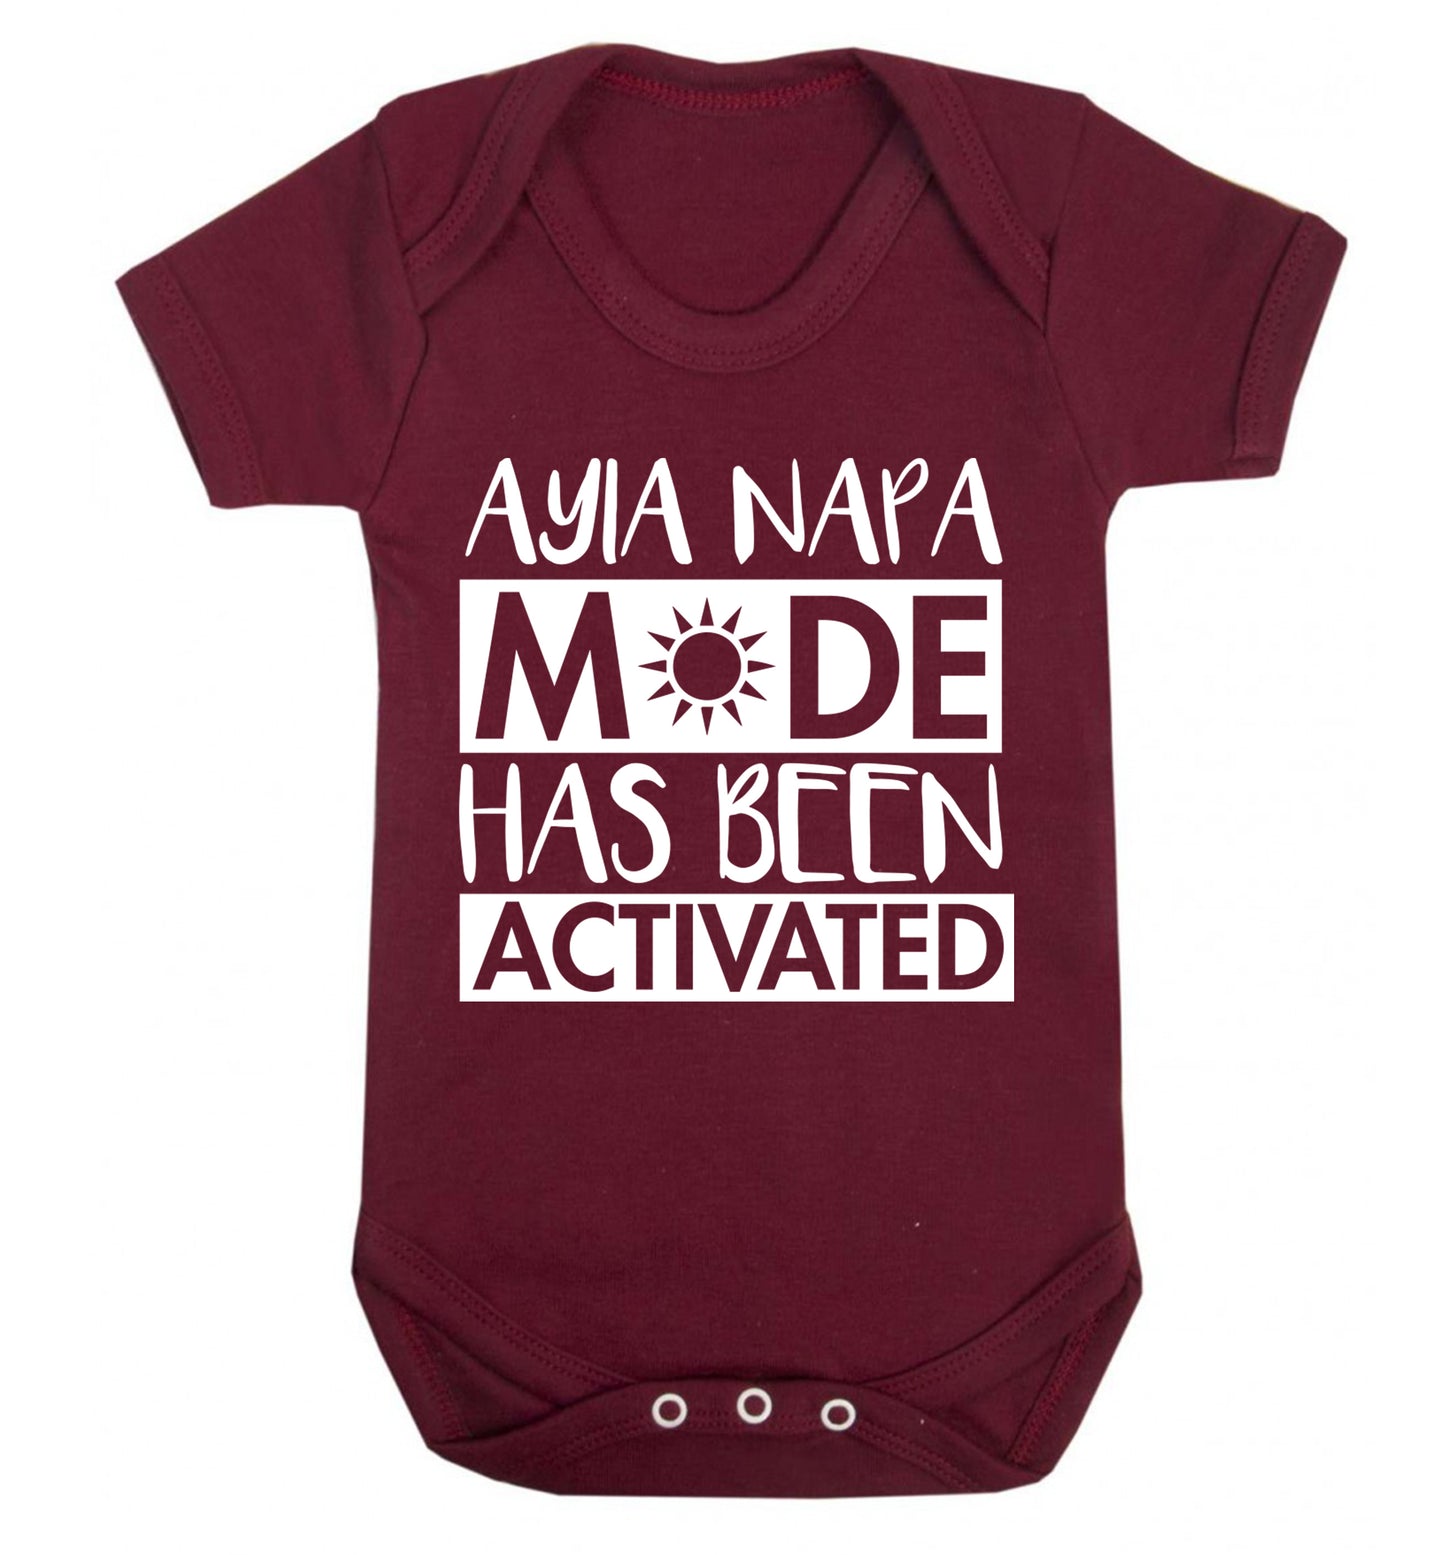 Ayia Napa mode has been activated Baby Vest maroon 18-24 months